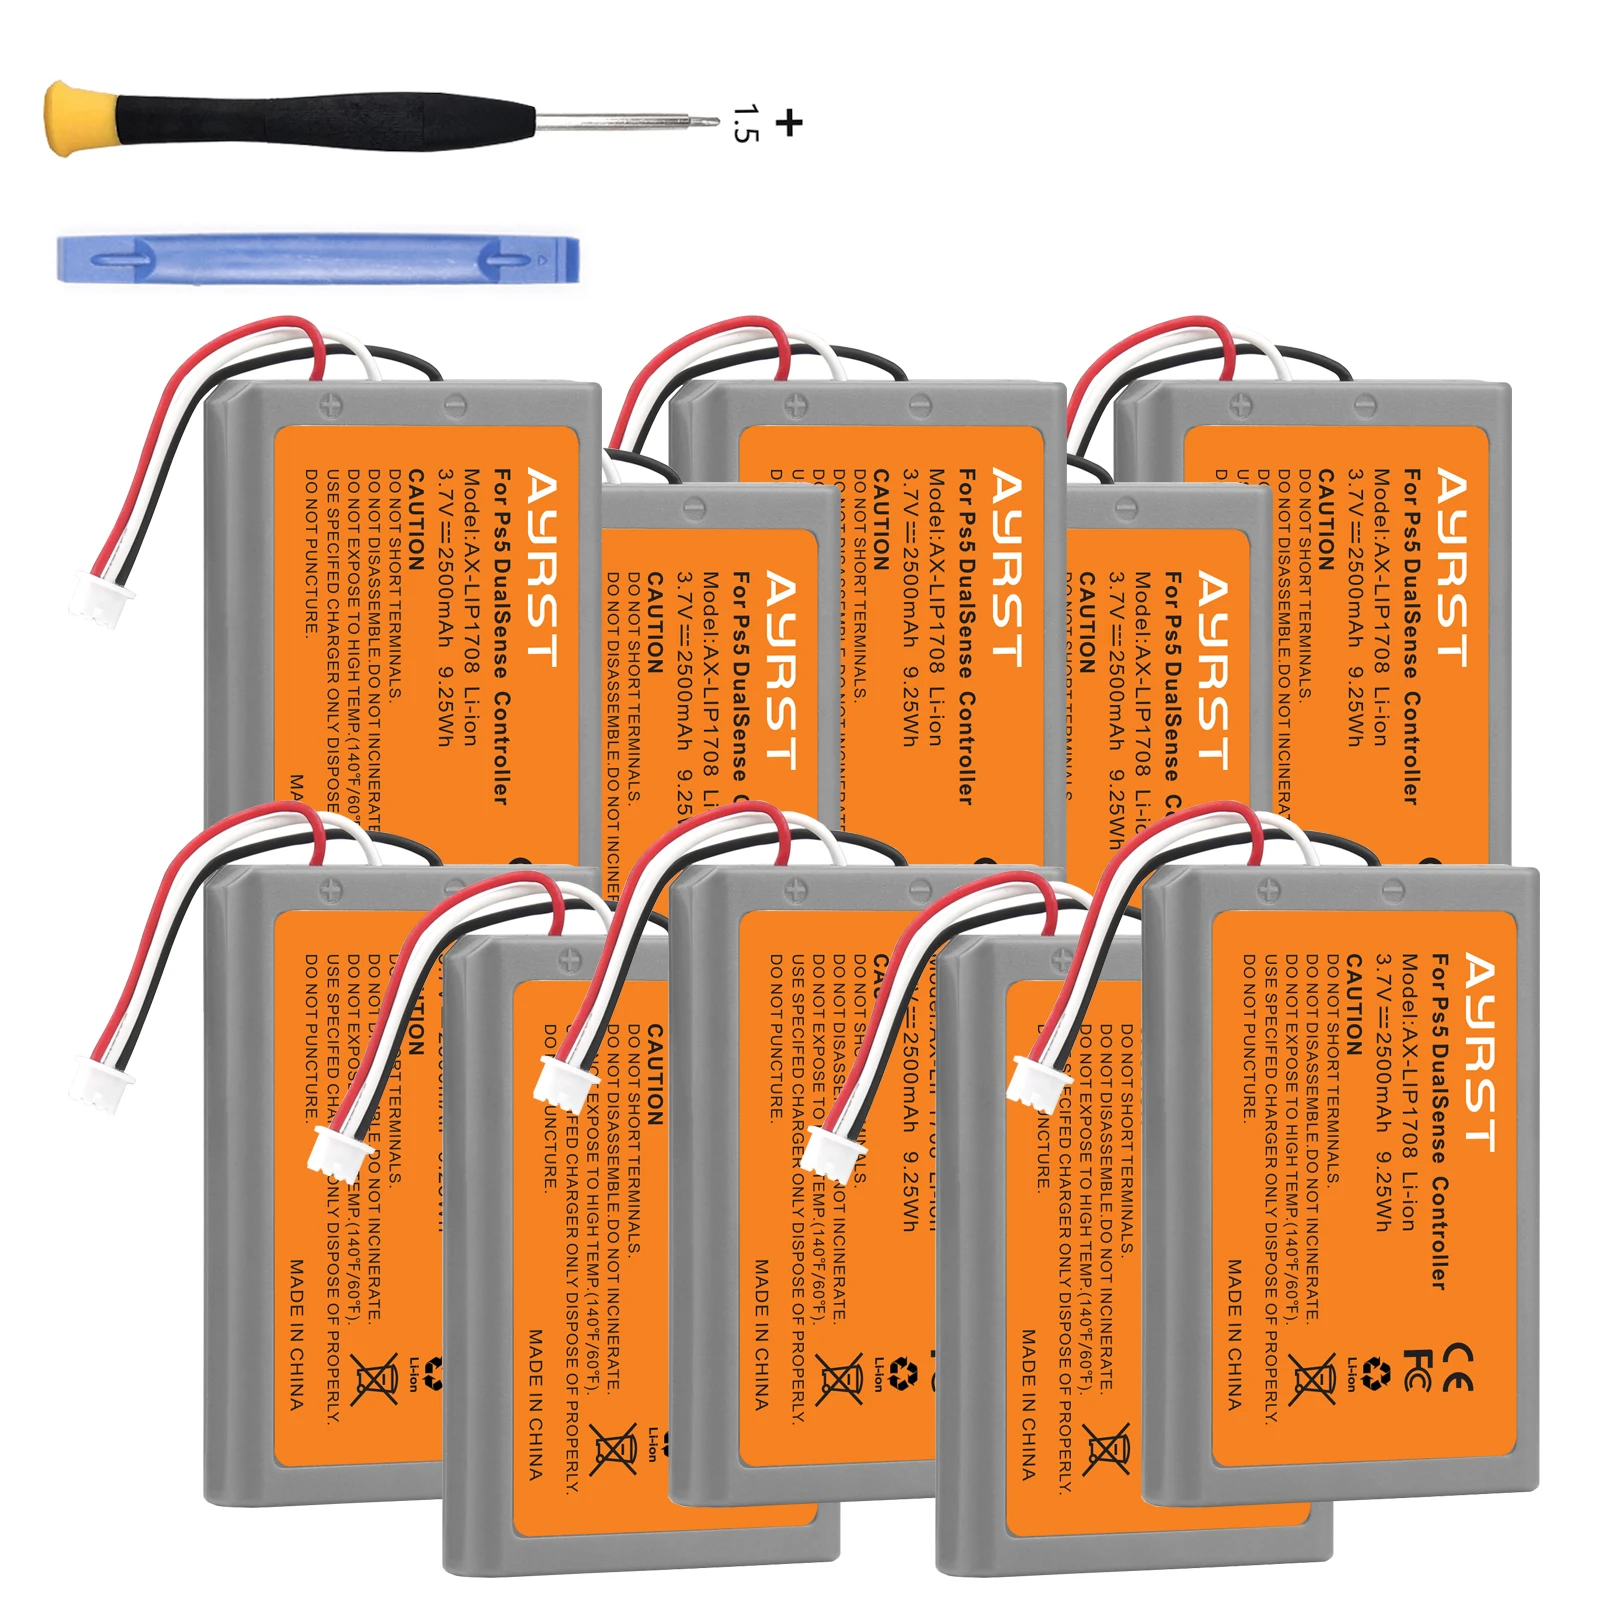 

10 Pcs 2500mAh LIP1708 Battery for Sony PlayStation 5 PS5 DualSense CFI-ZCT1W Wireless Controller Replacement Game Batteries